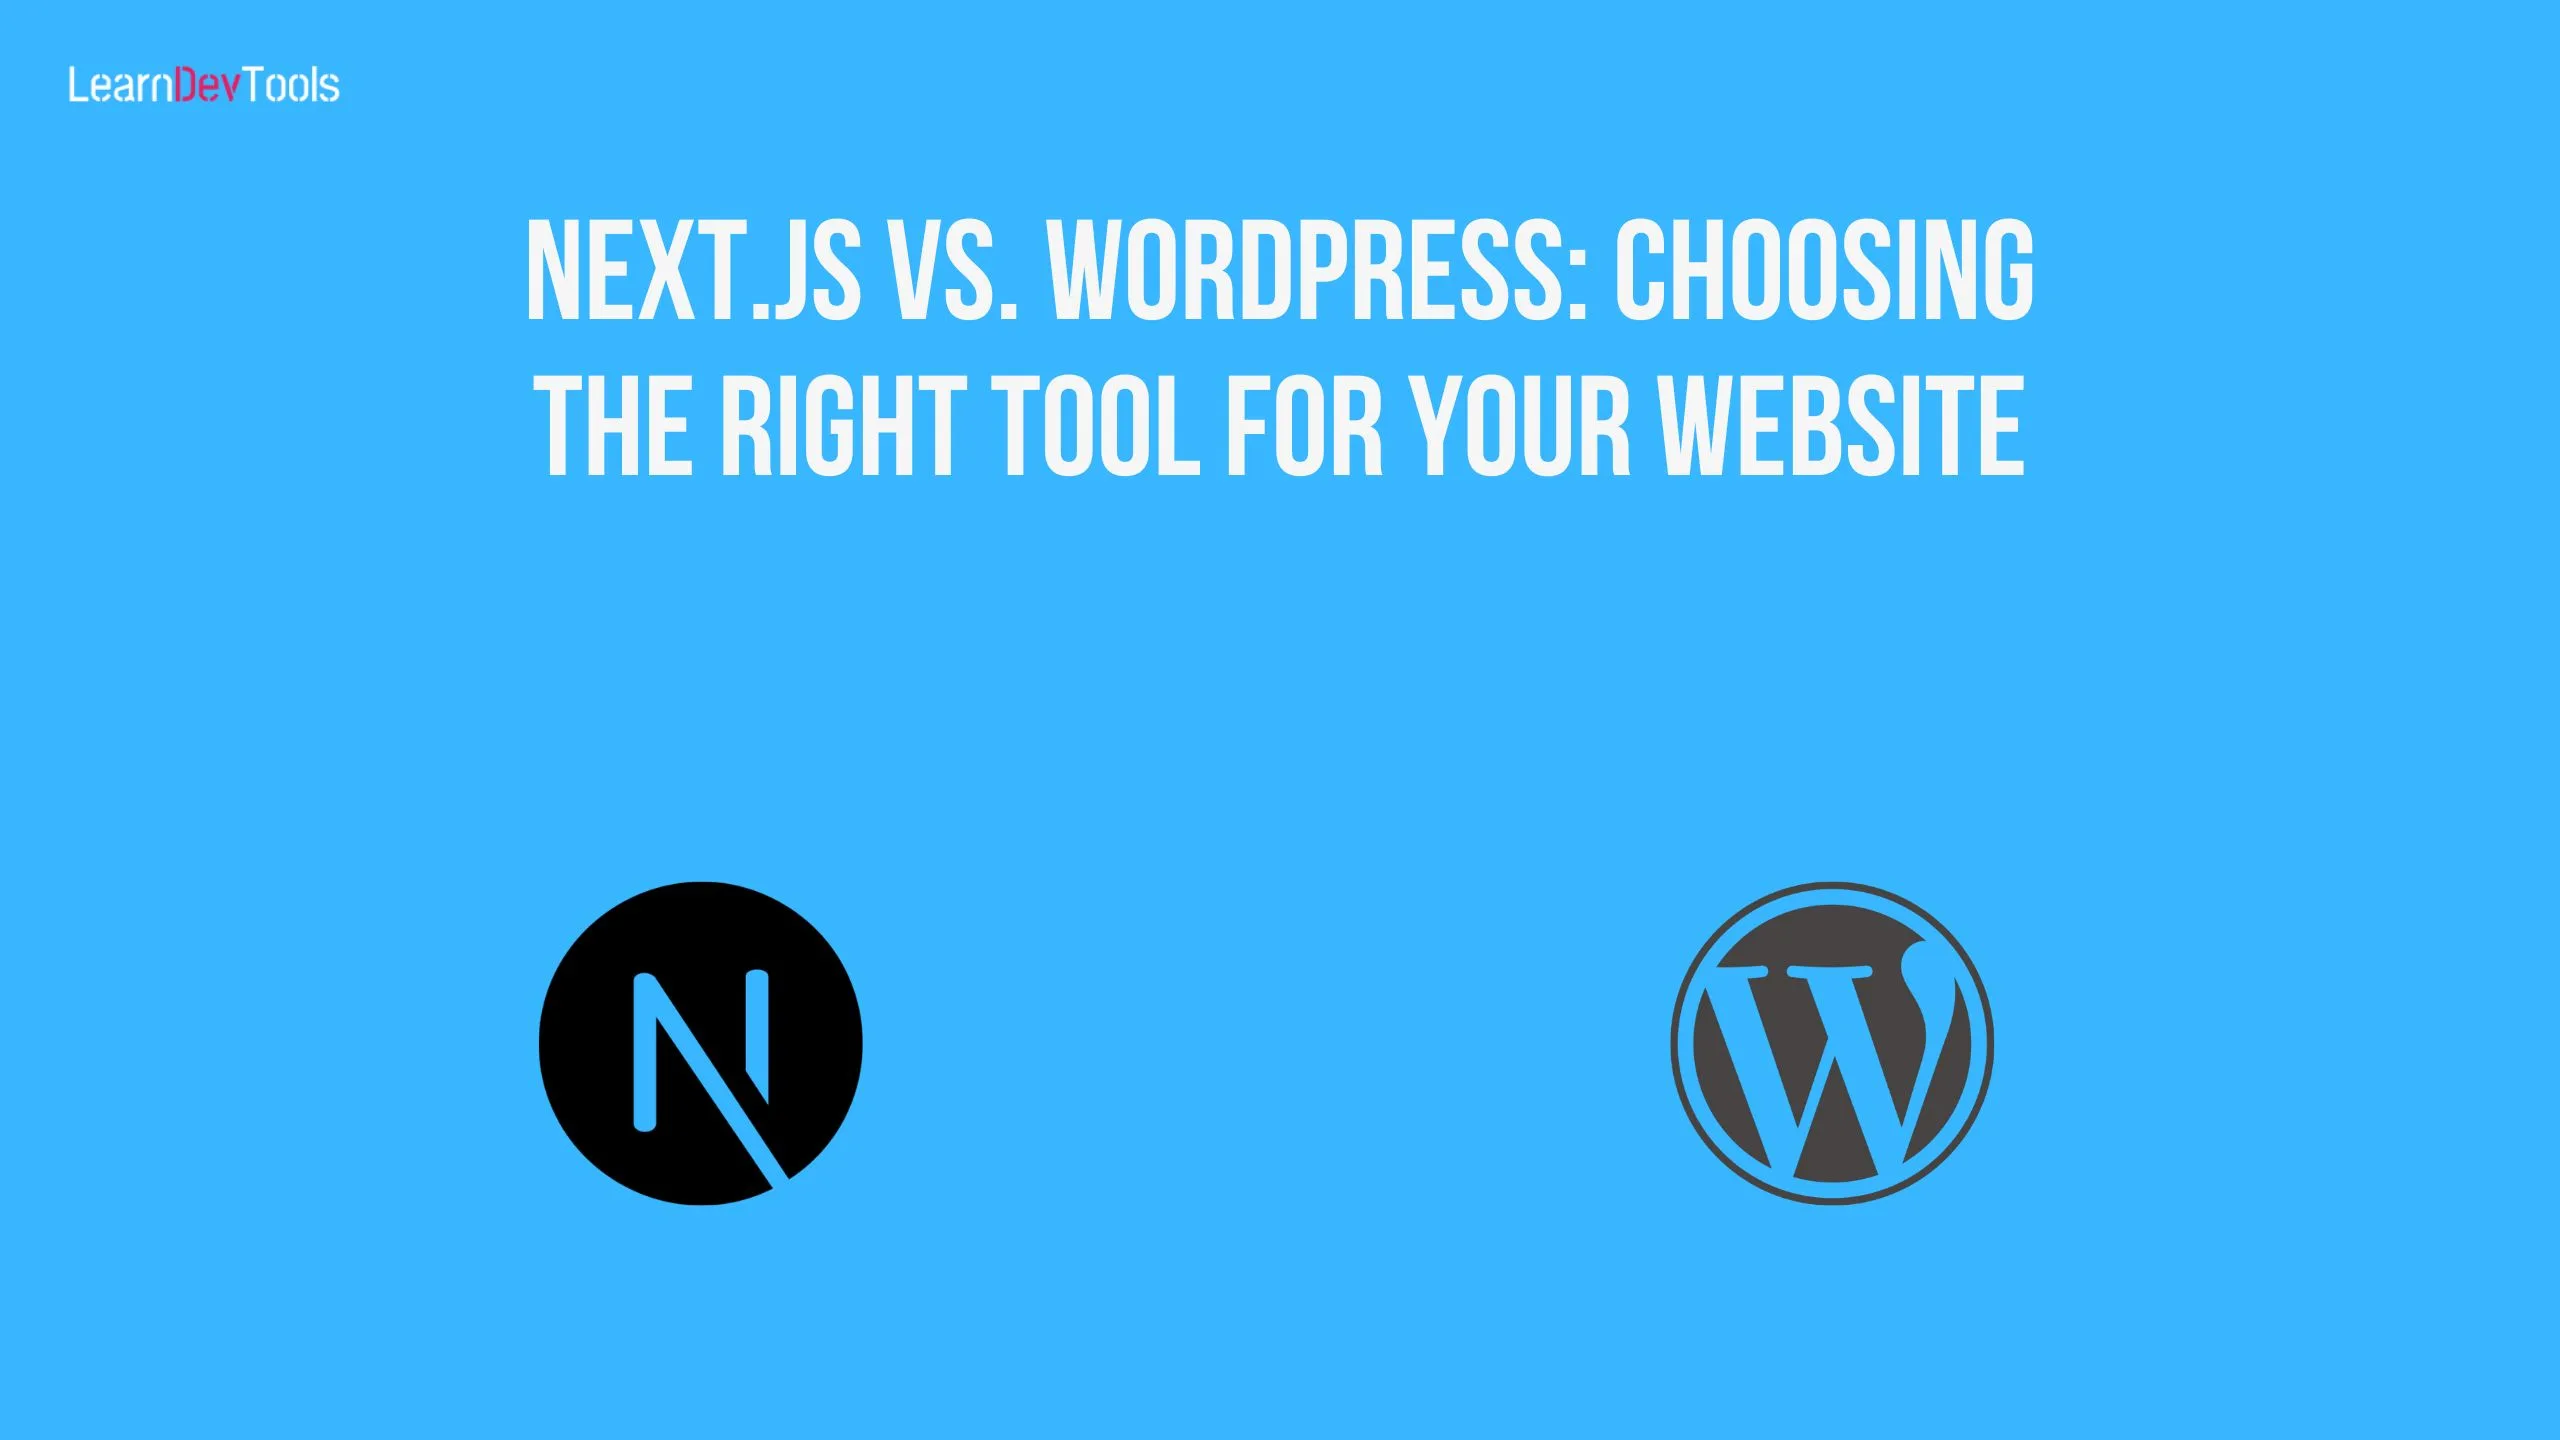 Next.js vs. WordPress: Choosing the Right Tool for Your Website